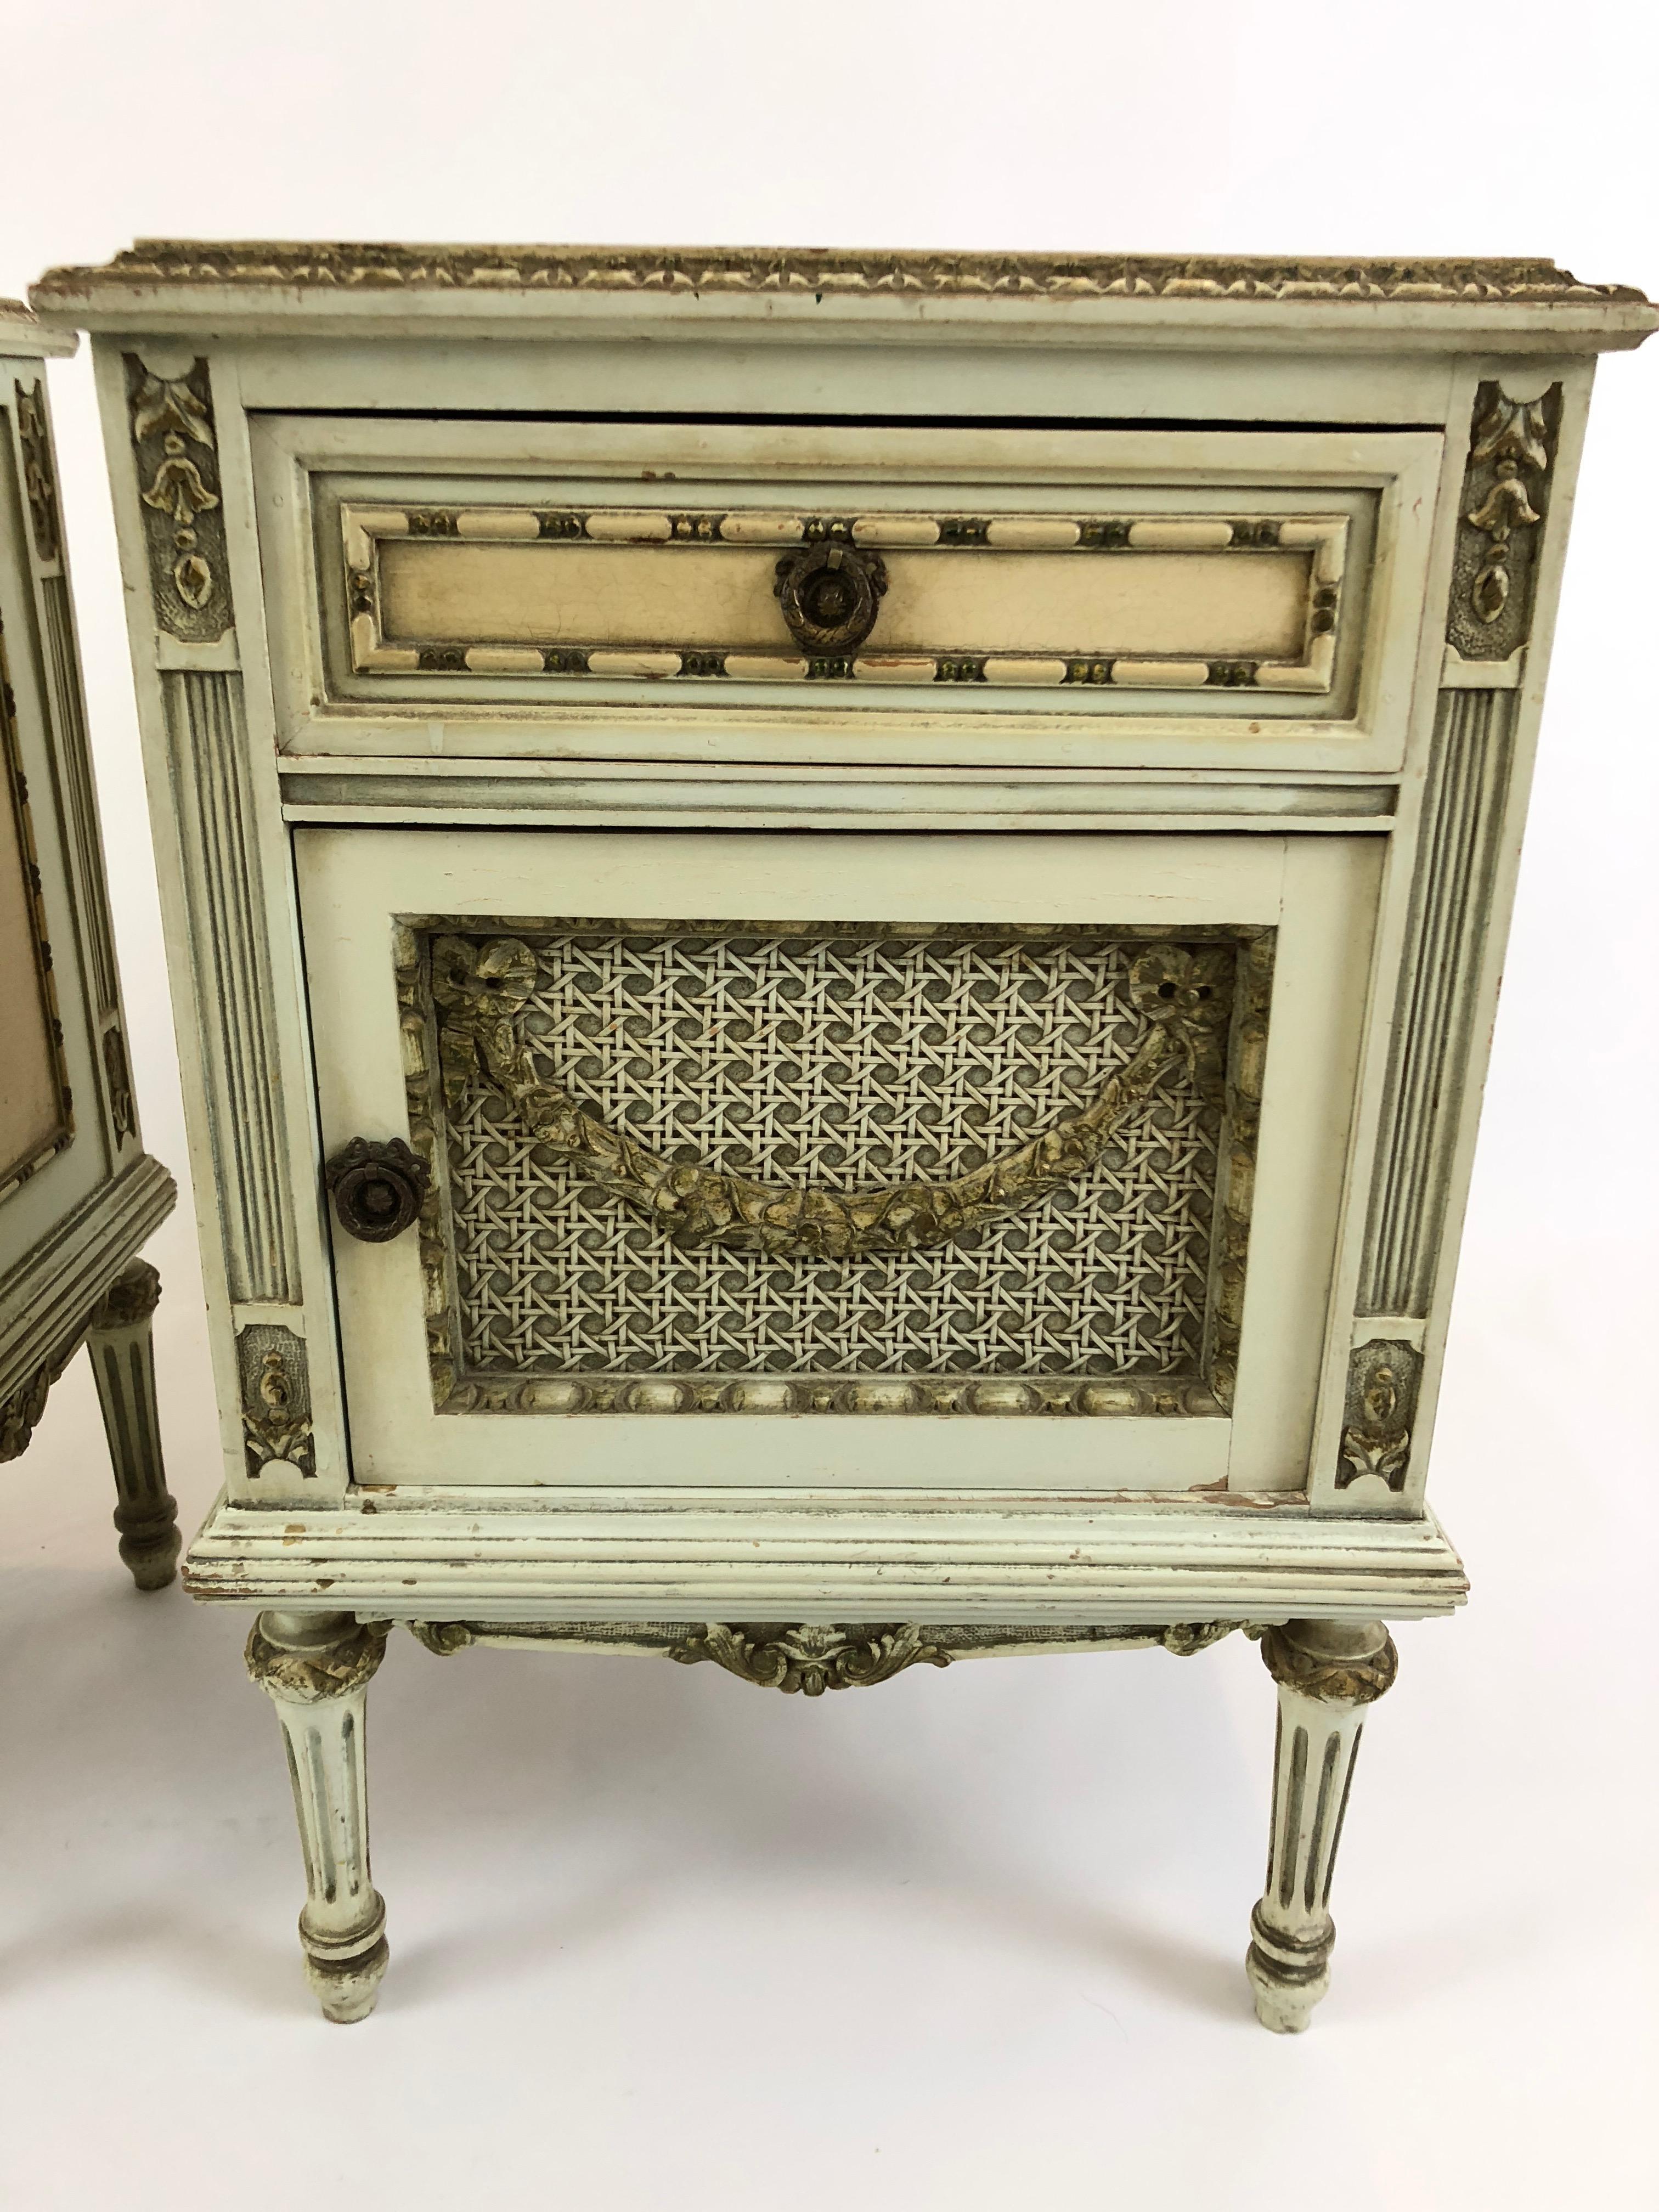 Two very romantic and ornate Louis XV style French nightstands painted a light celadon green, cream and gold, having single drawers and caned panelled doors that open for storage inside.